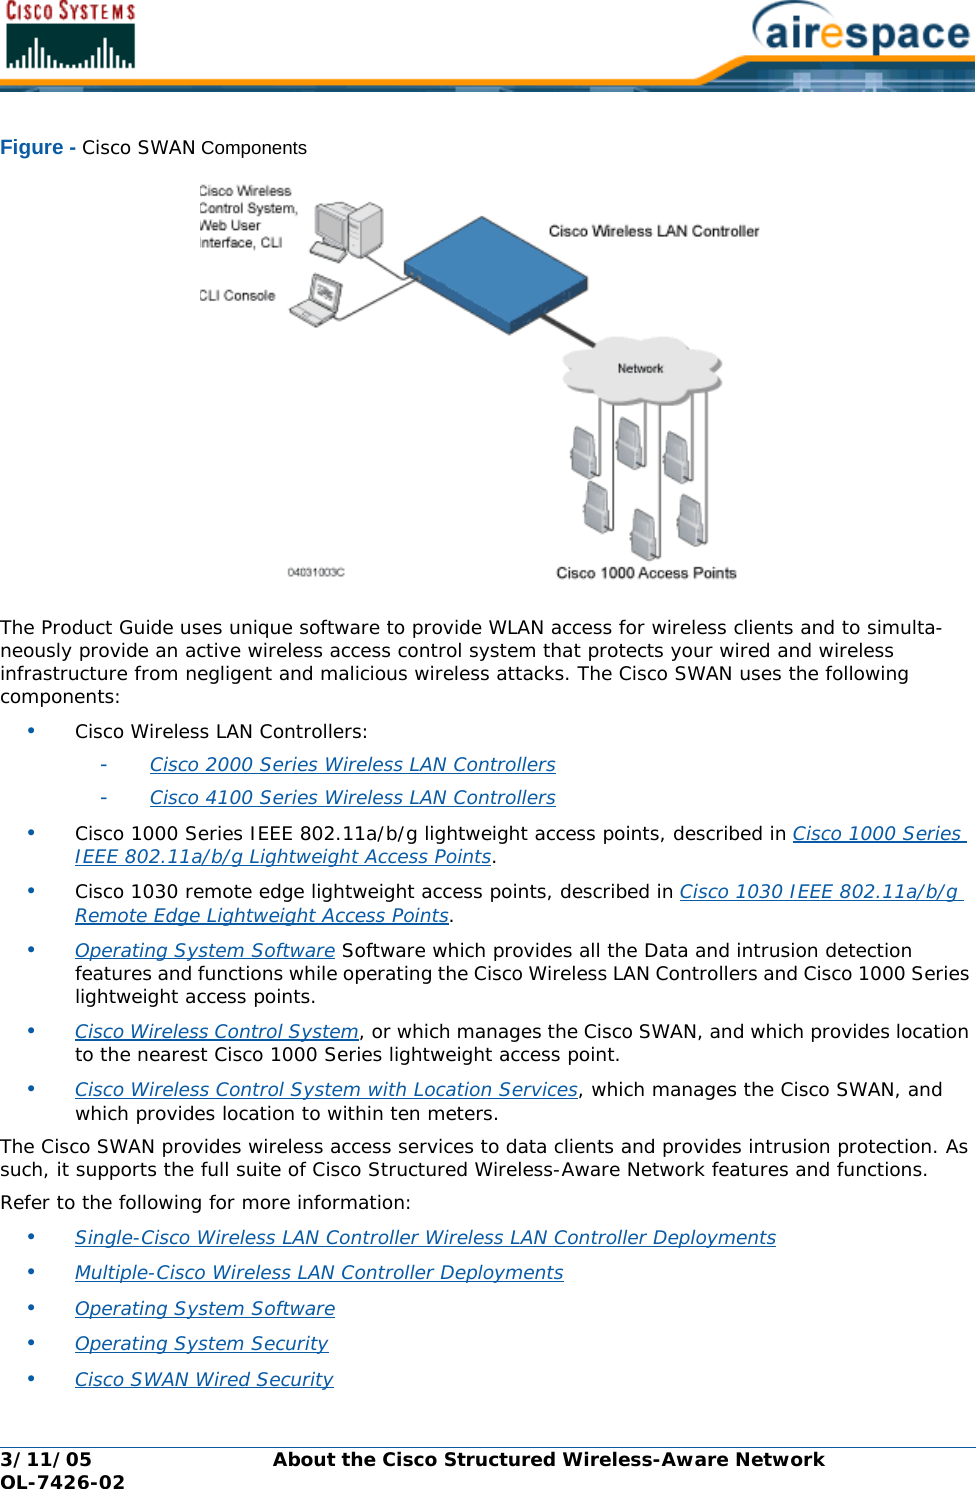 3/11/05 About the Cisco Structured Wireless-Aware Network  OL-7426-02Figure - Cisco SWAN ComponentsThe Product Guide uses unique software to provide WLAN access for wireless clients and to simulta-neously provide an active wireless access control system that protects your wired and wireless infrastructure from negligent and malicious wireless attacks. The Cisco SWAN uses the following components:•Cisco Wireless LAN Controllers: -Cisco 2000 Series Wireless LAN Controllers -Cisco 4100 Series Wireless LAN Controllers •Cisco 1000 Series IEEE 802.11a/b/g lightweight access points, described in Cisco 1000 Series IEEE 802.11a/b/g Lightweight Access Points.•Cisco 1030 remote edge lightweight access points, described in Cisco 1030 IEEE 802.11a/b/g Remote Edge Lightweight Access Points.•Operating System Software Software which provides all the Data and intrusion detection features and functions while operating the Cisco Wireless LAN Controllers and Cisco 1000 Series lightweight access points.•Cisco Wireless Control System, or which manages the Cisco SWAN, and which provides location to the nearest Cisco 1000 Series lightweight access point.•Cisco Wireless Control System with Location Services, which manages the Cisco SWAN, and which provides location to within ten meters.The Cisco SWAN provides wireless access services to data clients and provides intrusion protection. As such, it supports the full suite of Cisco Structured Wireless-Aware Network features and functions.Refer to the following for more information:•Single-Cisco Wireless LAN Controller Wireless LAN Controller Deployments •Multiple-Cisco Wireless LAN Controller Deployments •Operating System Software •Operating System Security •Cisco SWAN Wired Security 